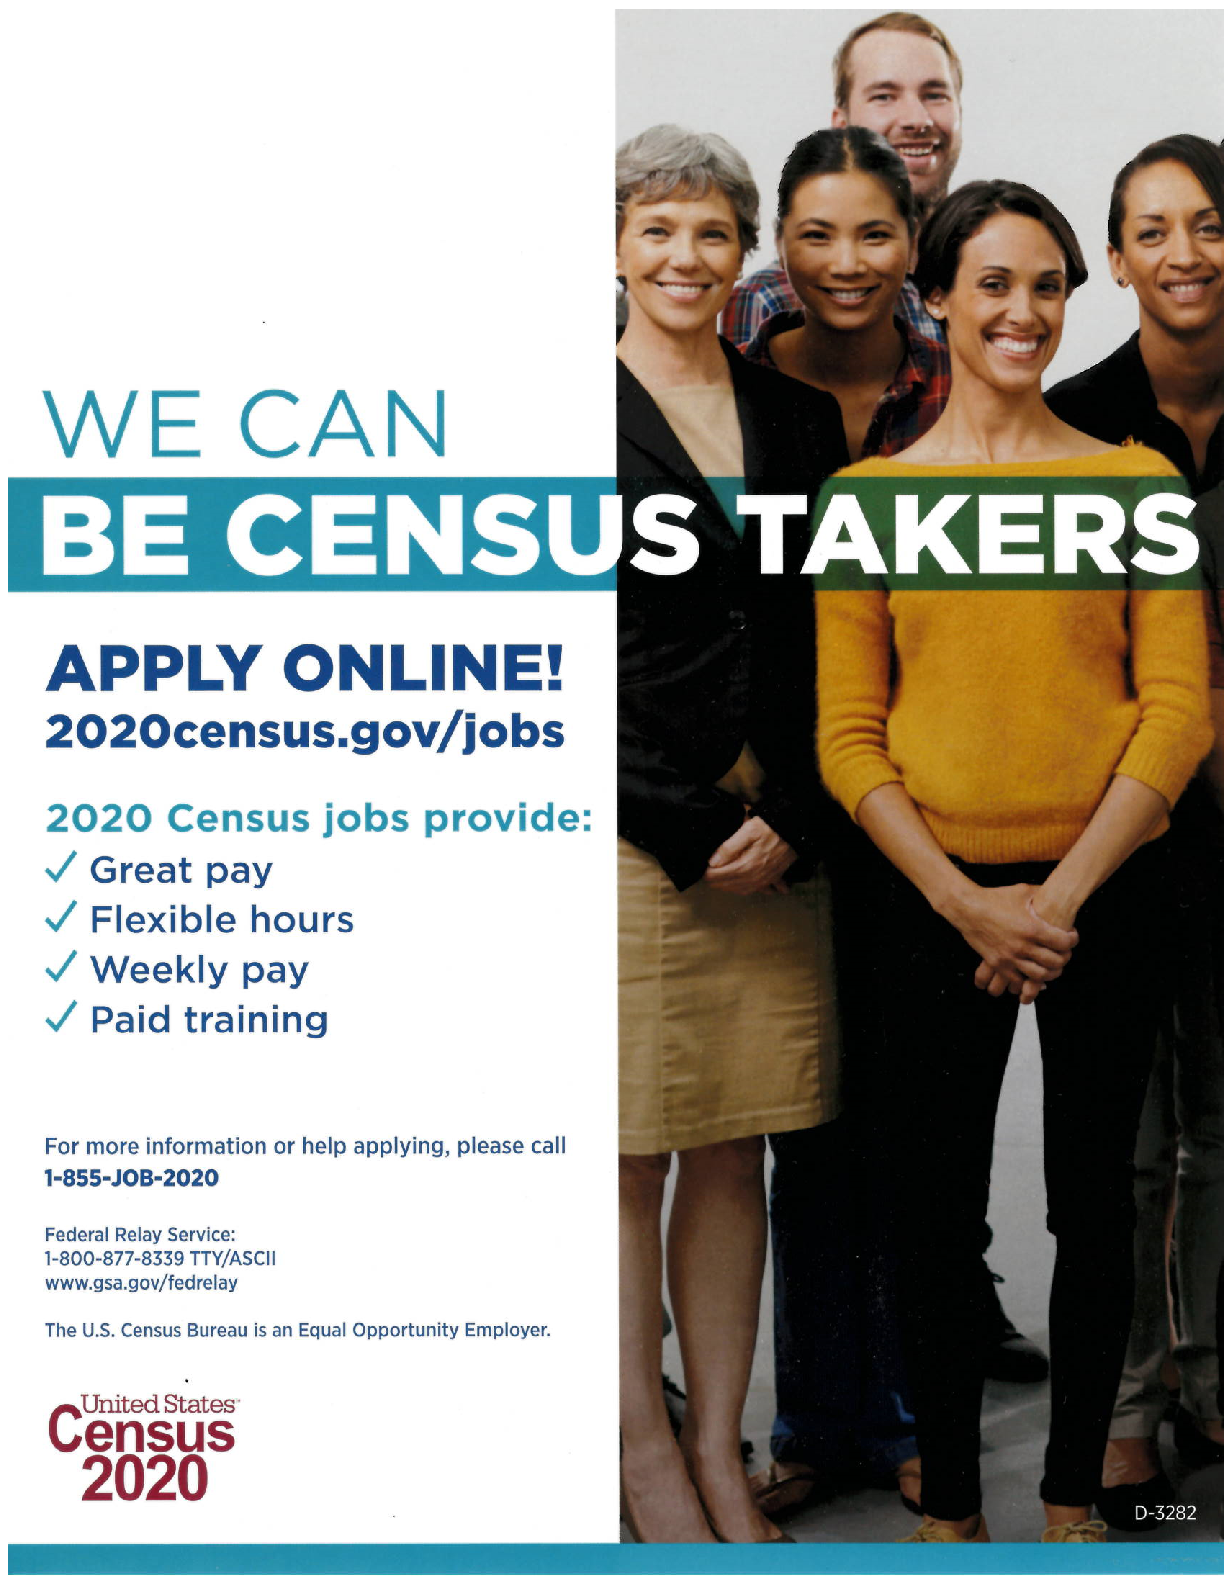 Be a Census Taker